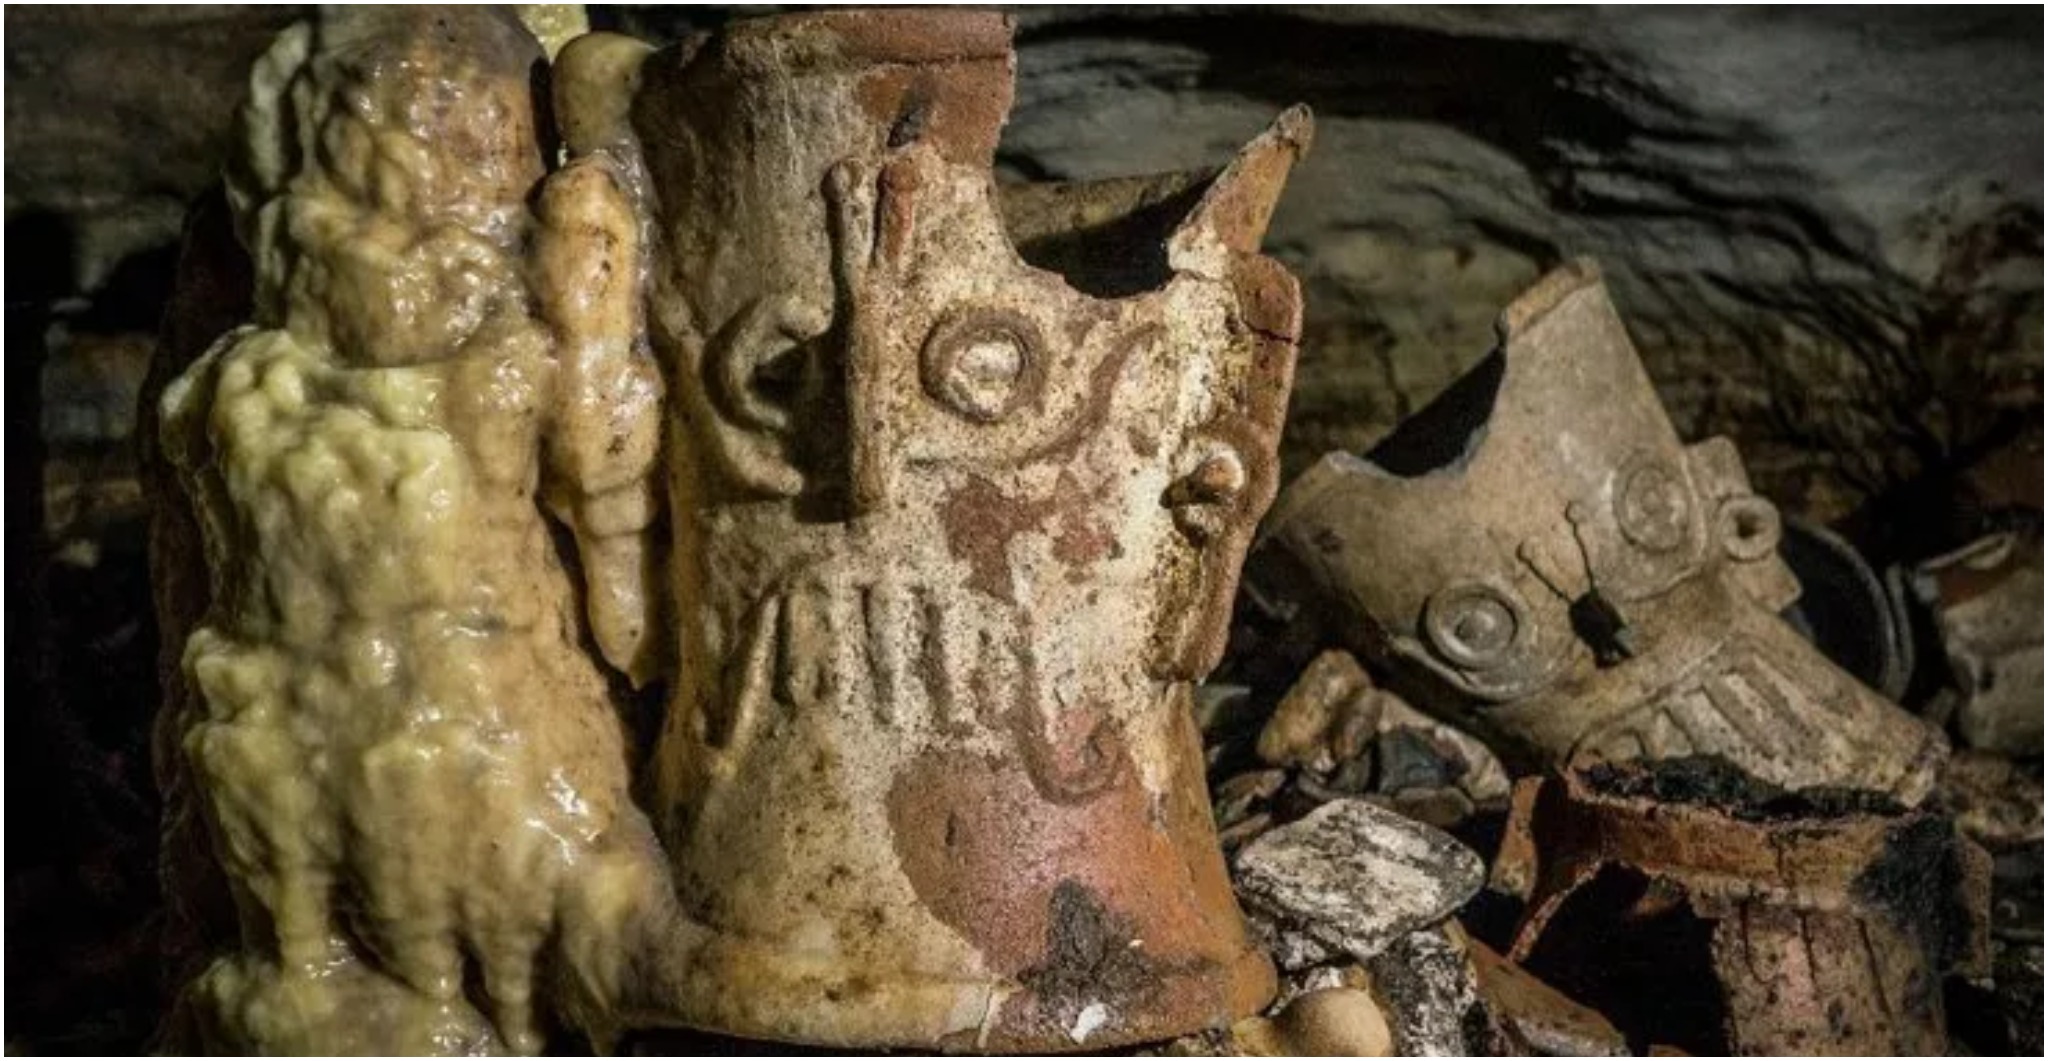 Untouched for 1,000 years, over 150 ritual artifacts were found in the cave at Balamku.  (Karla Ortega, Great Mayan Aquifer Project, INAH)